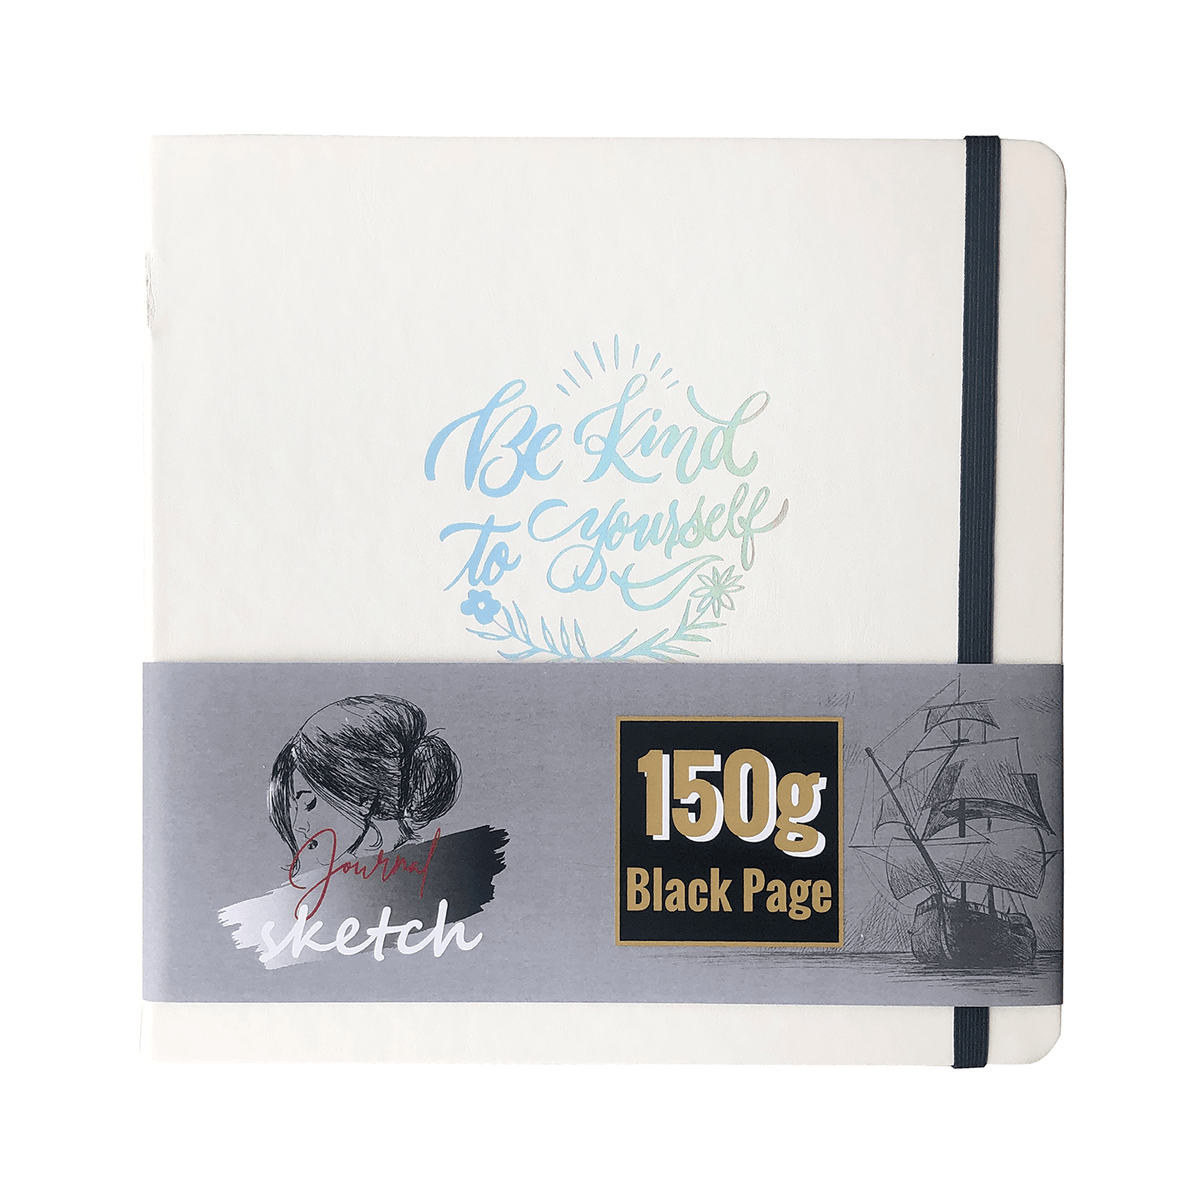 8 x 8 Inch Hardcover Sketch Journal – 150GSM Black Paper 160 Pages - Black - bukenotebook